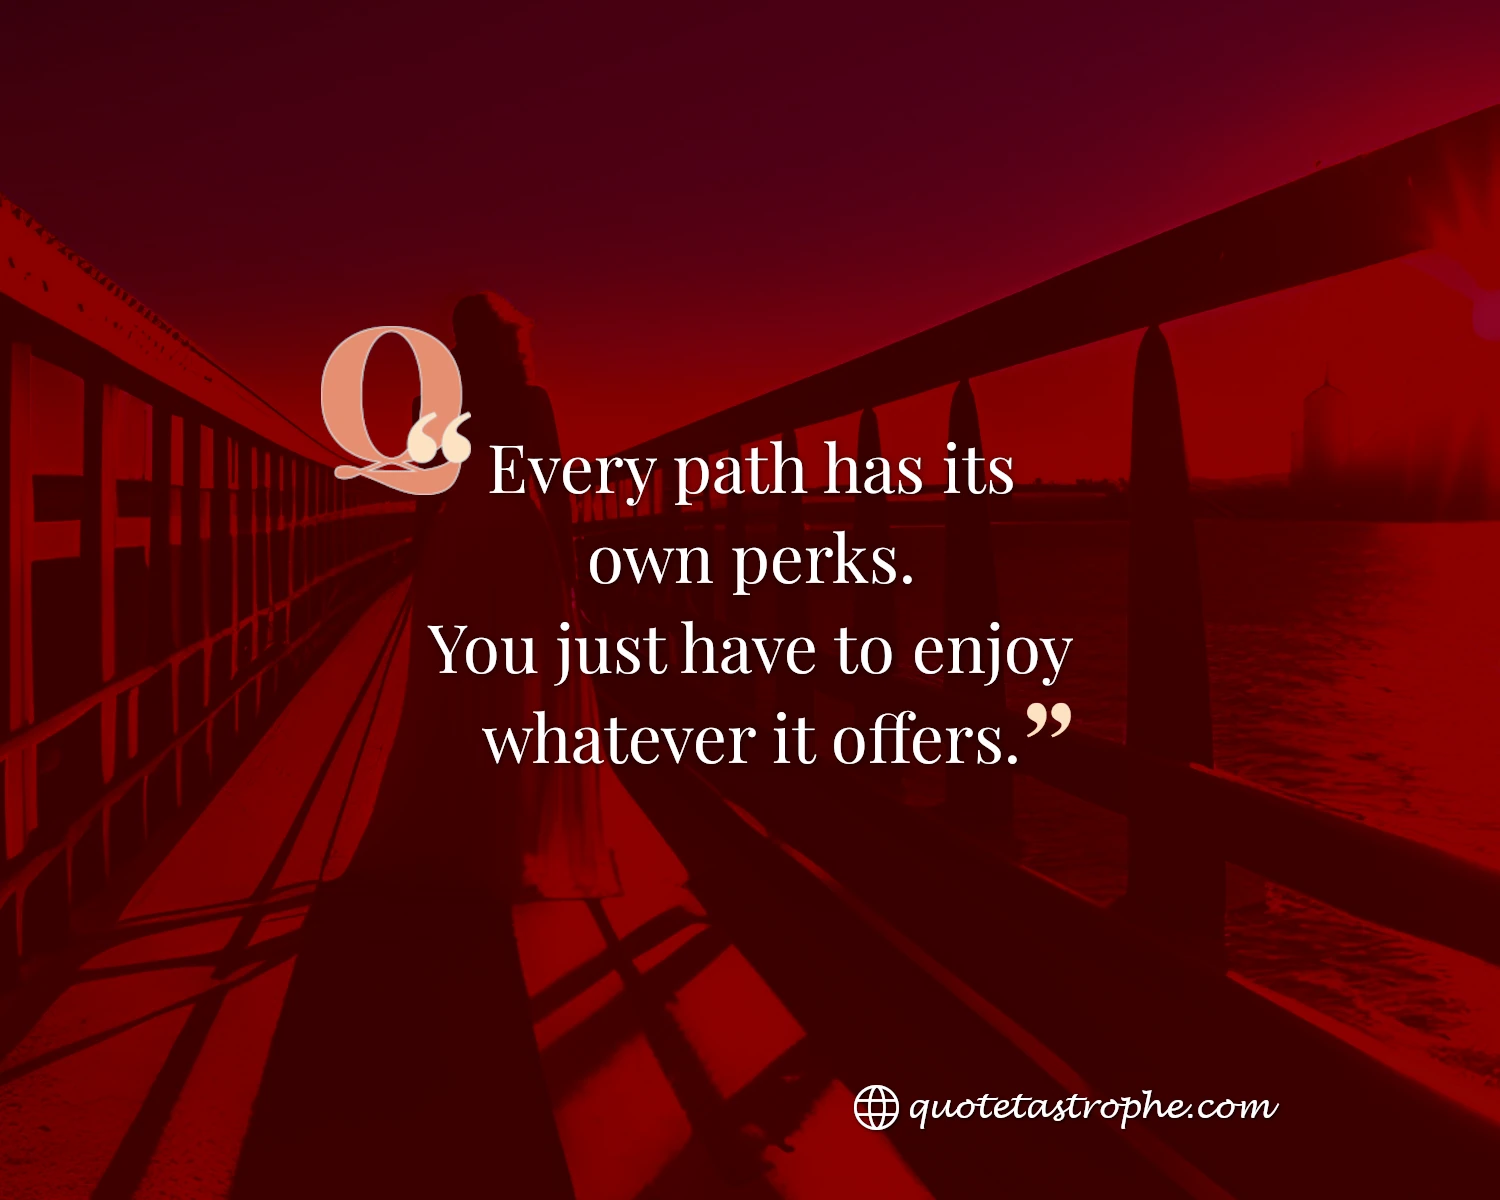 Every Path Has Its Own Perks That You Just Have To Enjoy